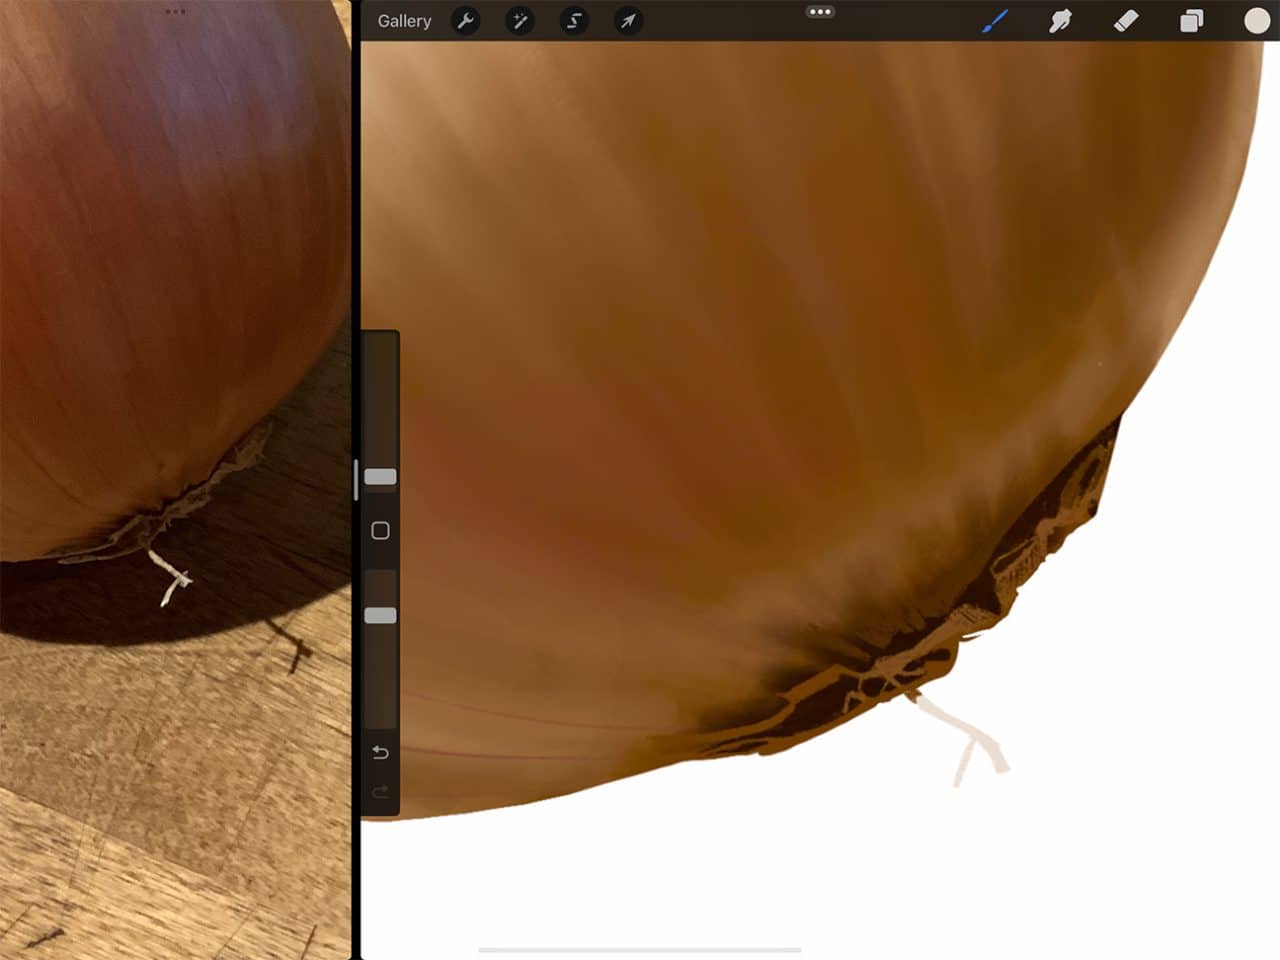 How to Draw Onions: Use different brushes for different looks and effects in Procreate.